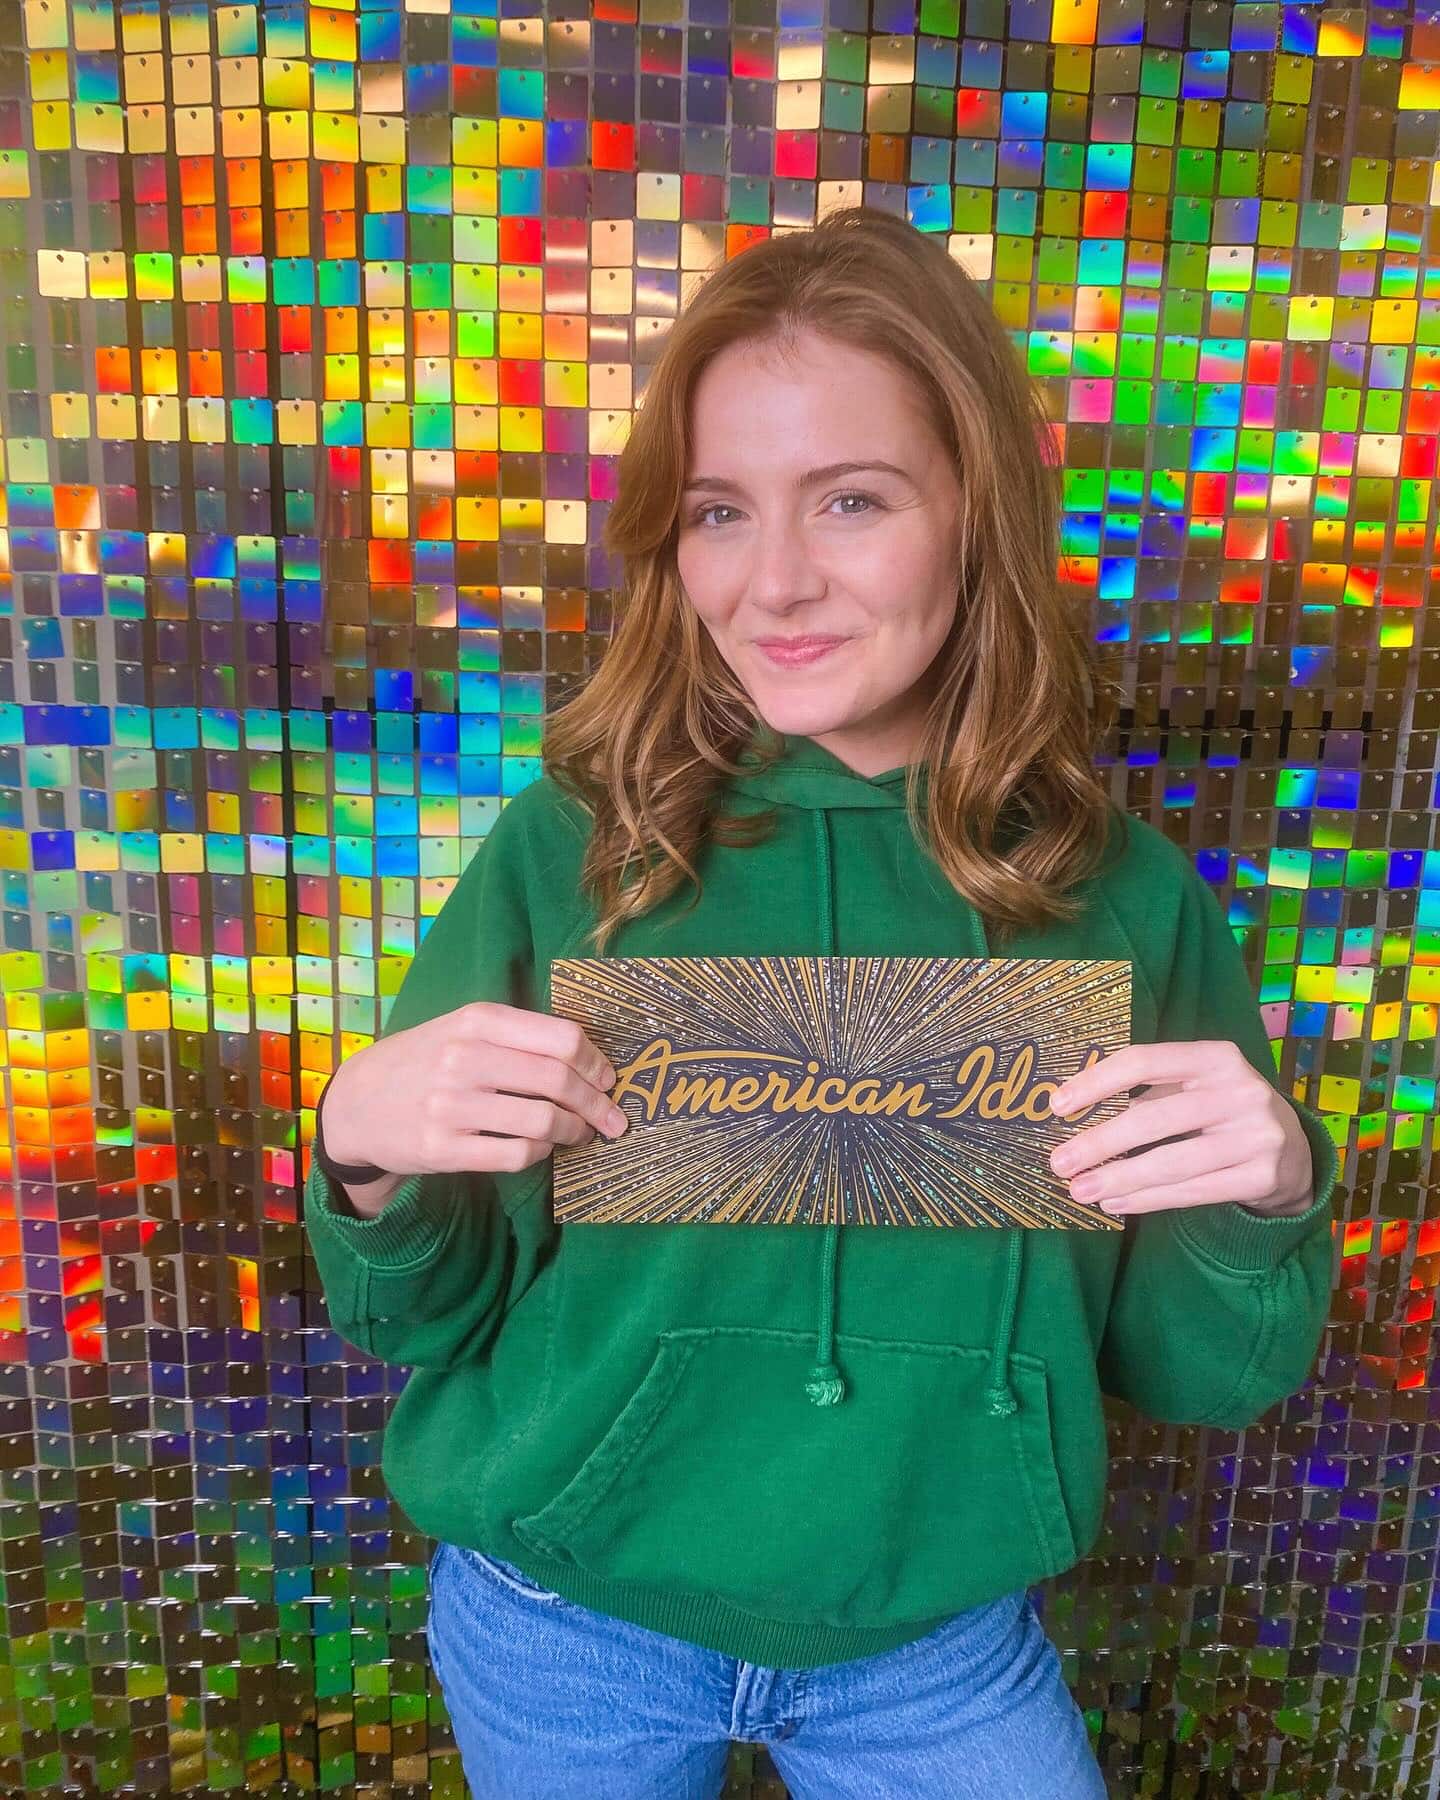 American Idol contestant Emmy Russell comes from a famous family, her grandmother was country music elgend Loretta Lynn. Here, Emmy is pictured with her Golden Ticket to Hollywood after her audition